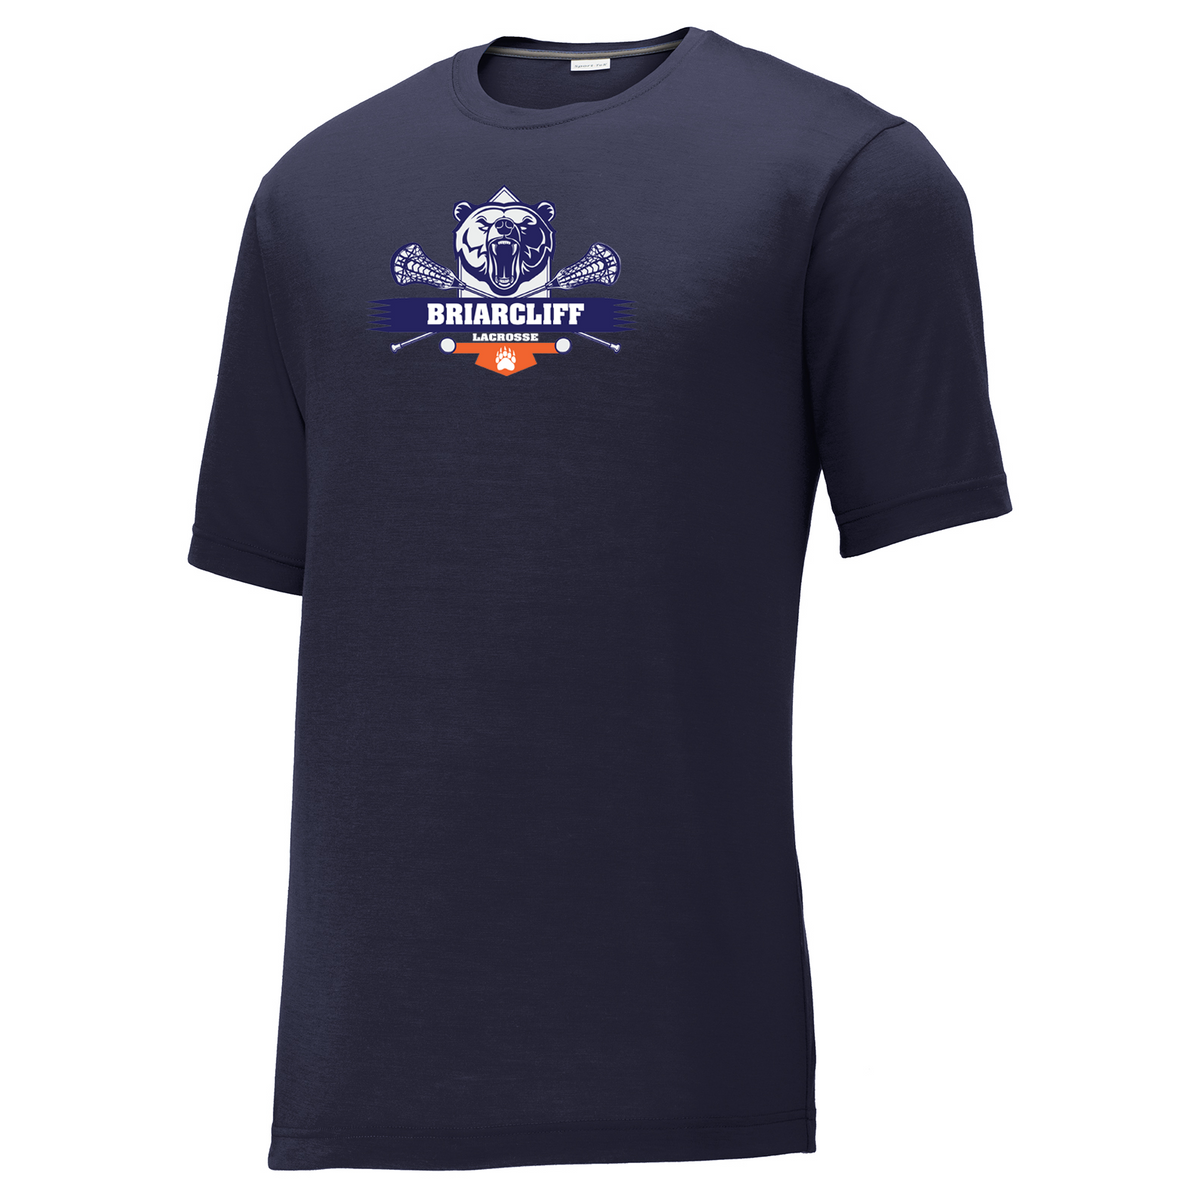 Briarcliff Lacrosse Navy CottonTouch Performance T-Shirt